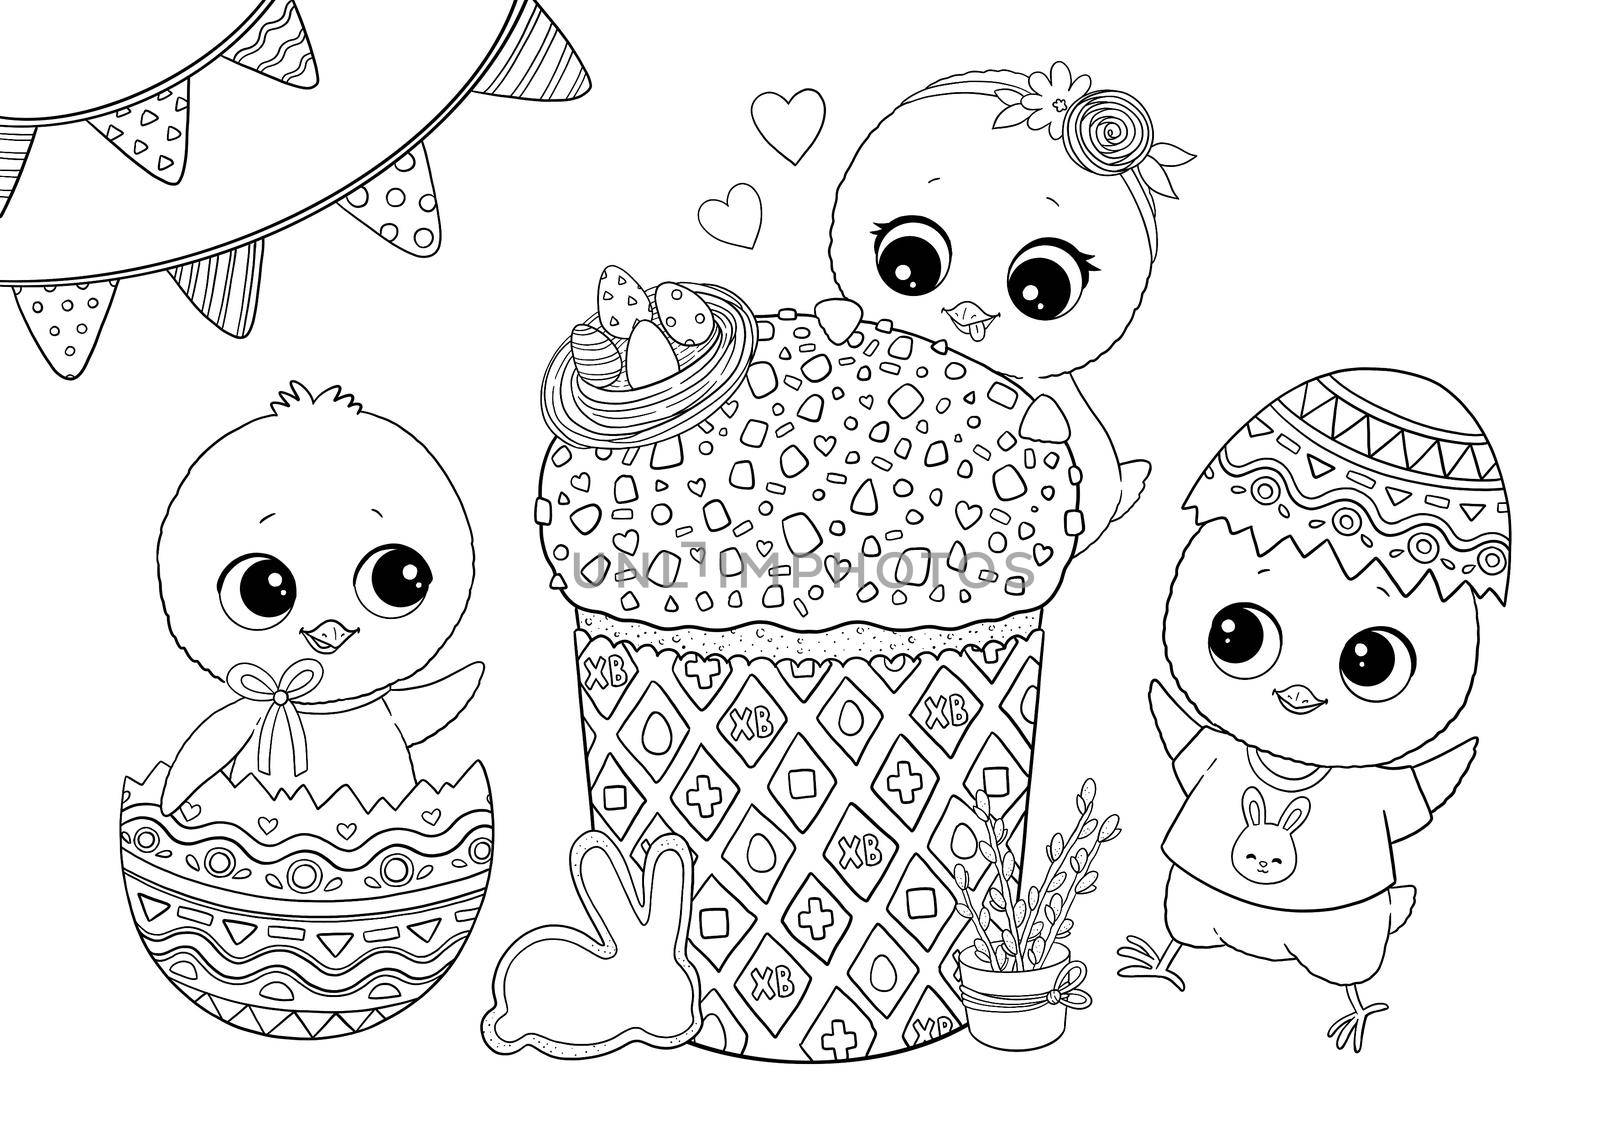 Easter chicken coloring illustration, black and white. High quality illustration